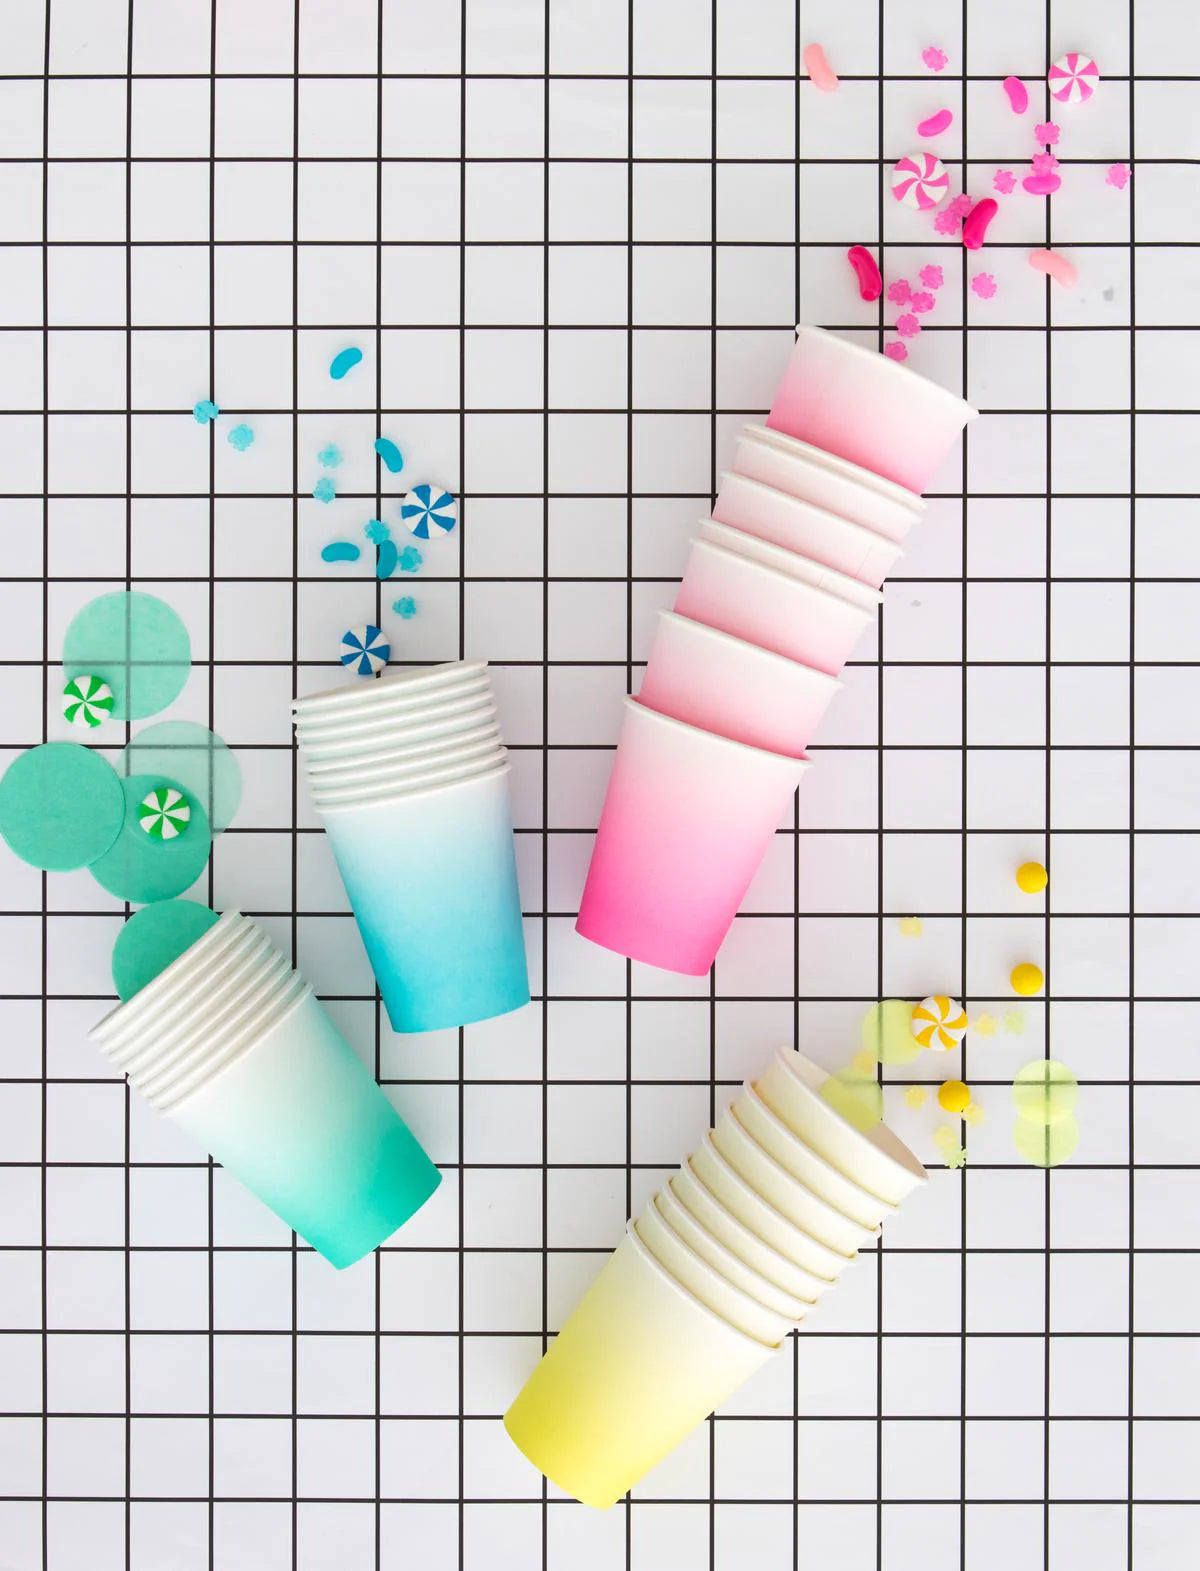 OH HAPPY DAY NEON ROSE OMBRE PAPER CUPS